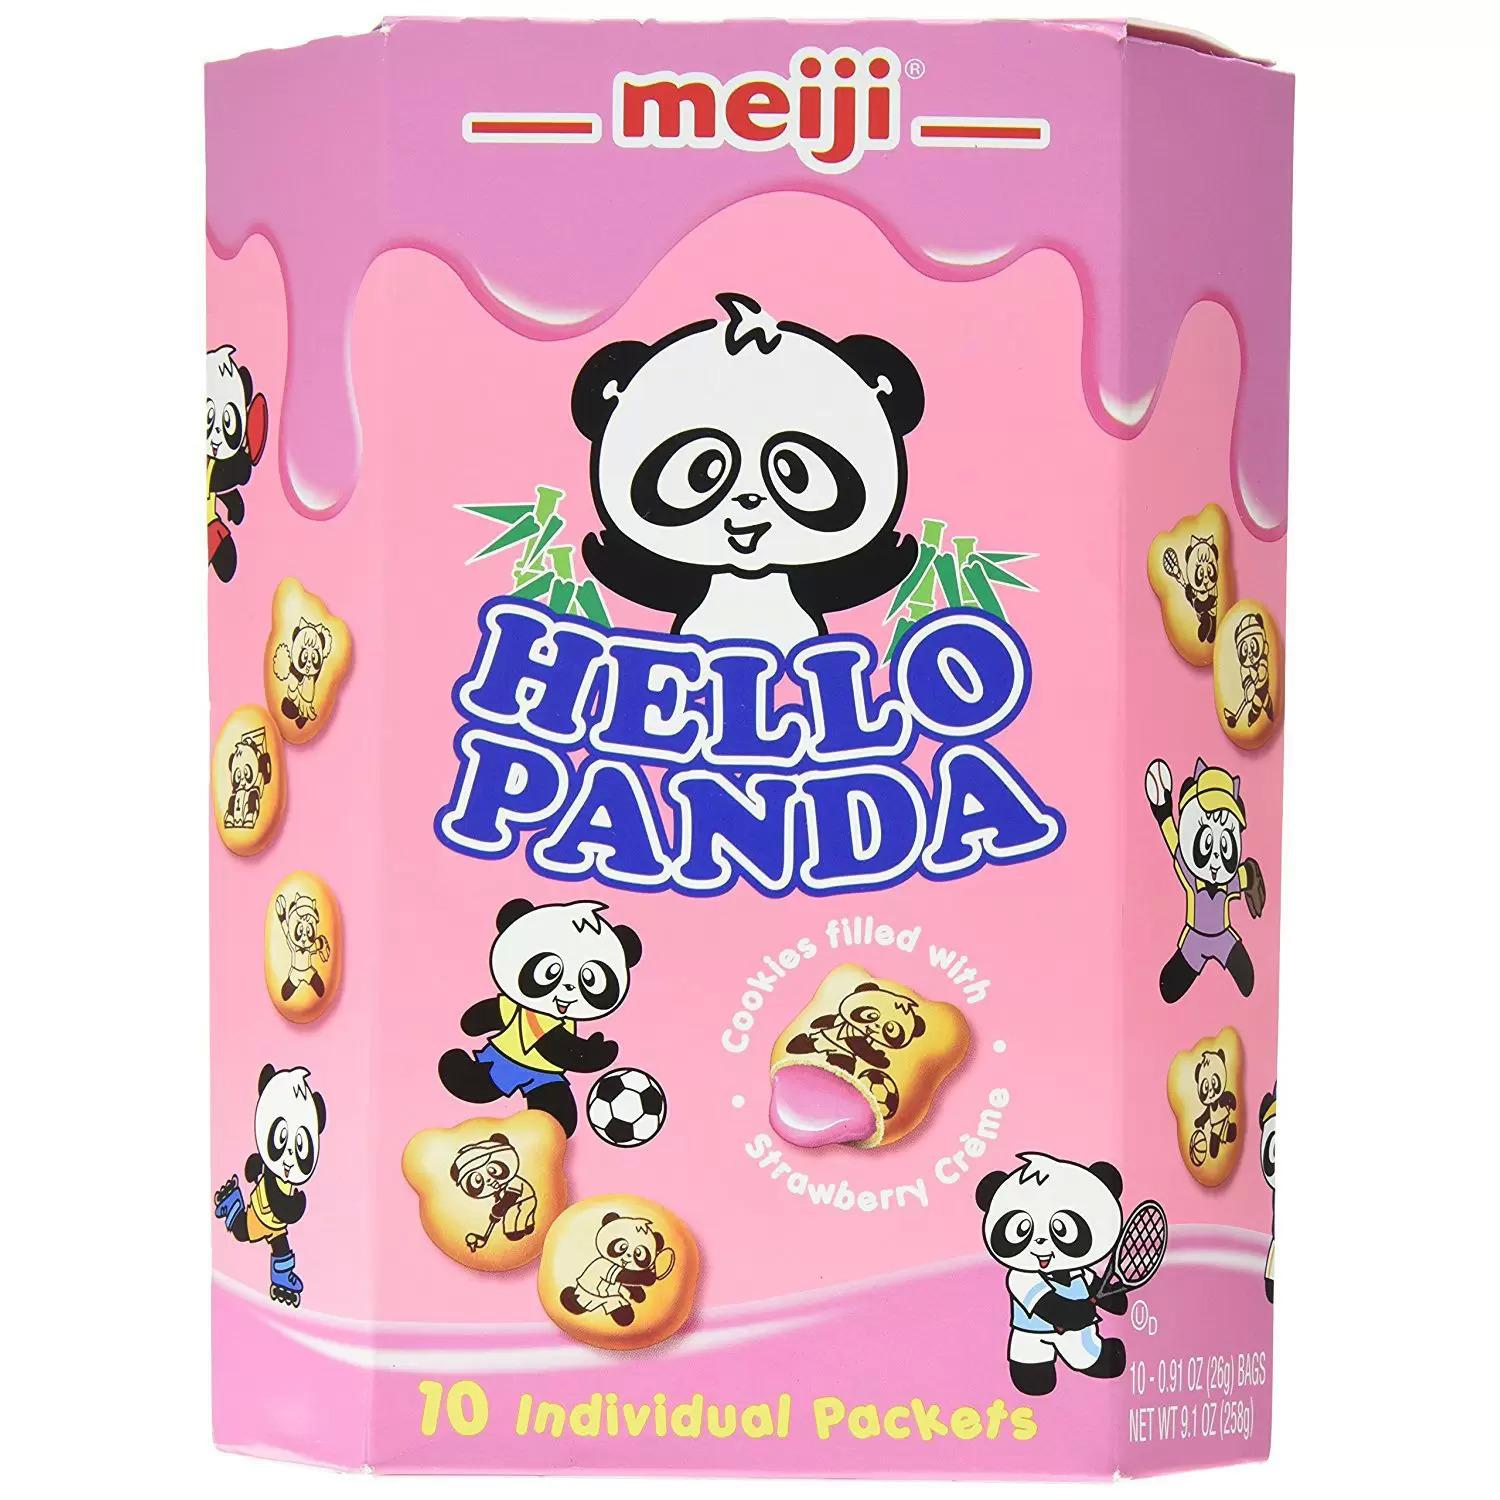 10 Meiji Hello Panda Strawberry Family Pack Cookies for $4.57 Shipped